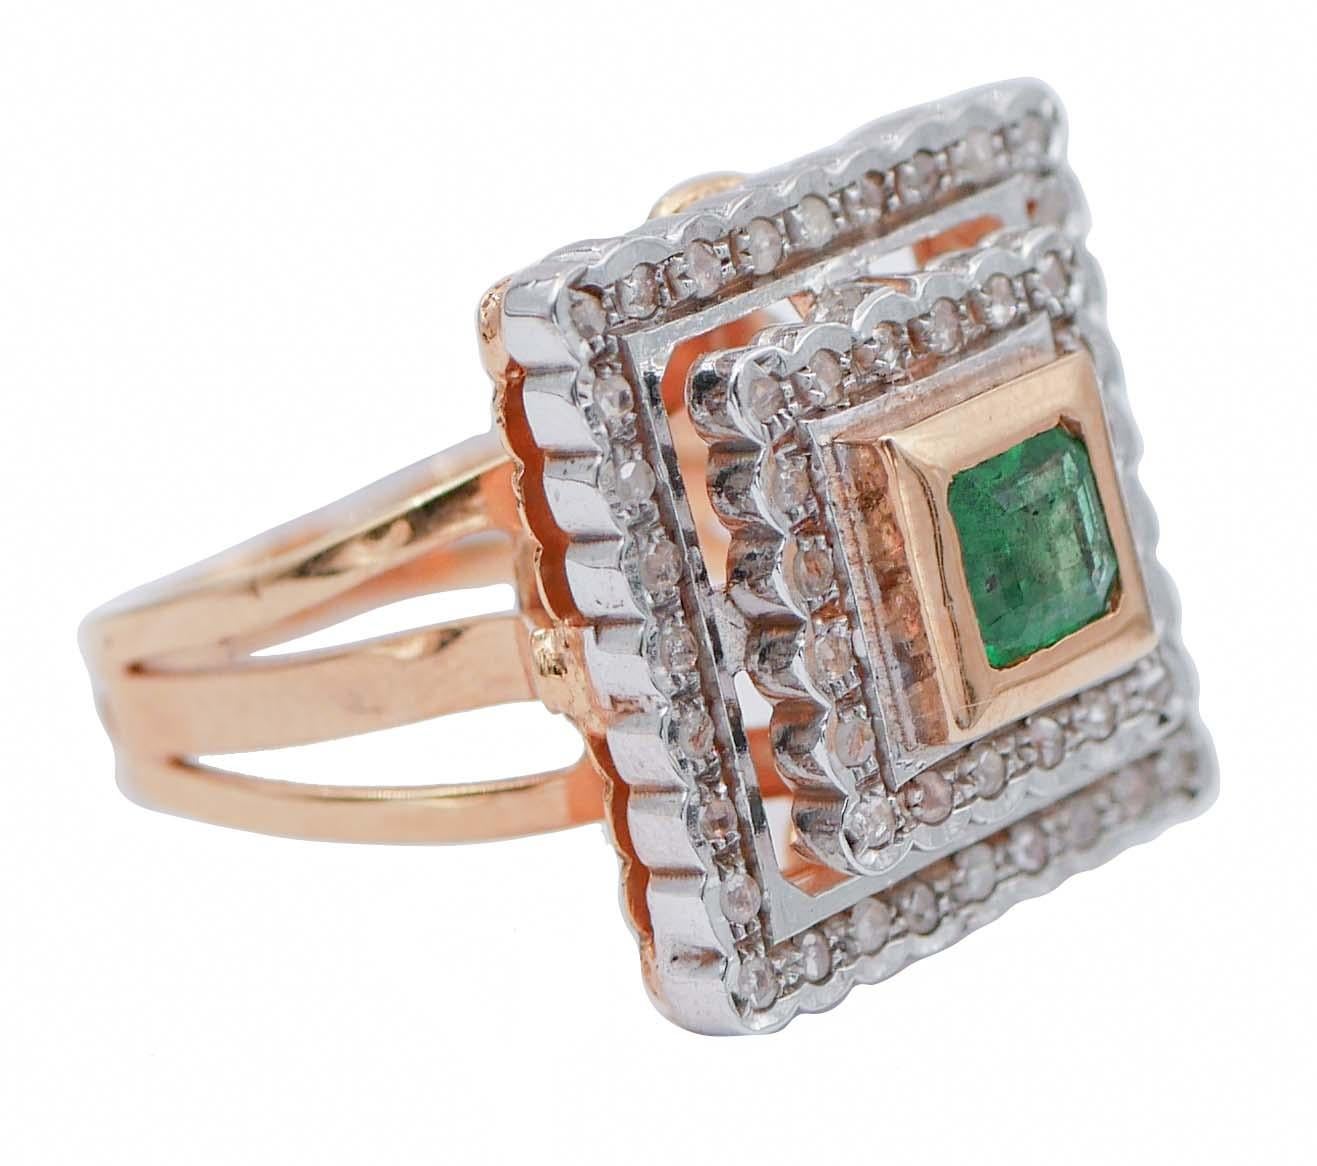 SHIPPING POLICY:
No additional costs will be added to this order.
Shipping costs will be totally covered by the seller (customs duties included).

Amazing retrò ring in 9 karat rose gold and silver structure mounted with a central emerald surrounded